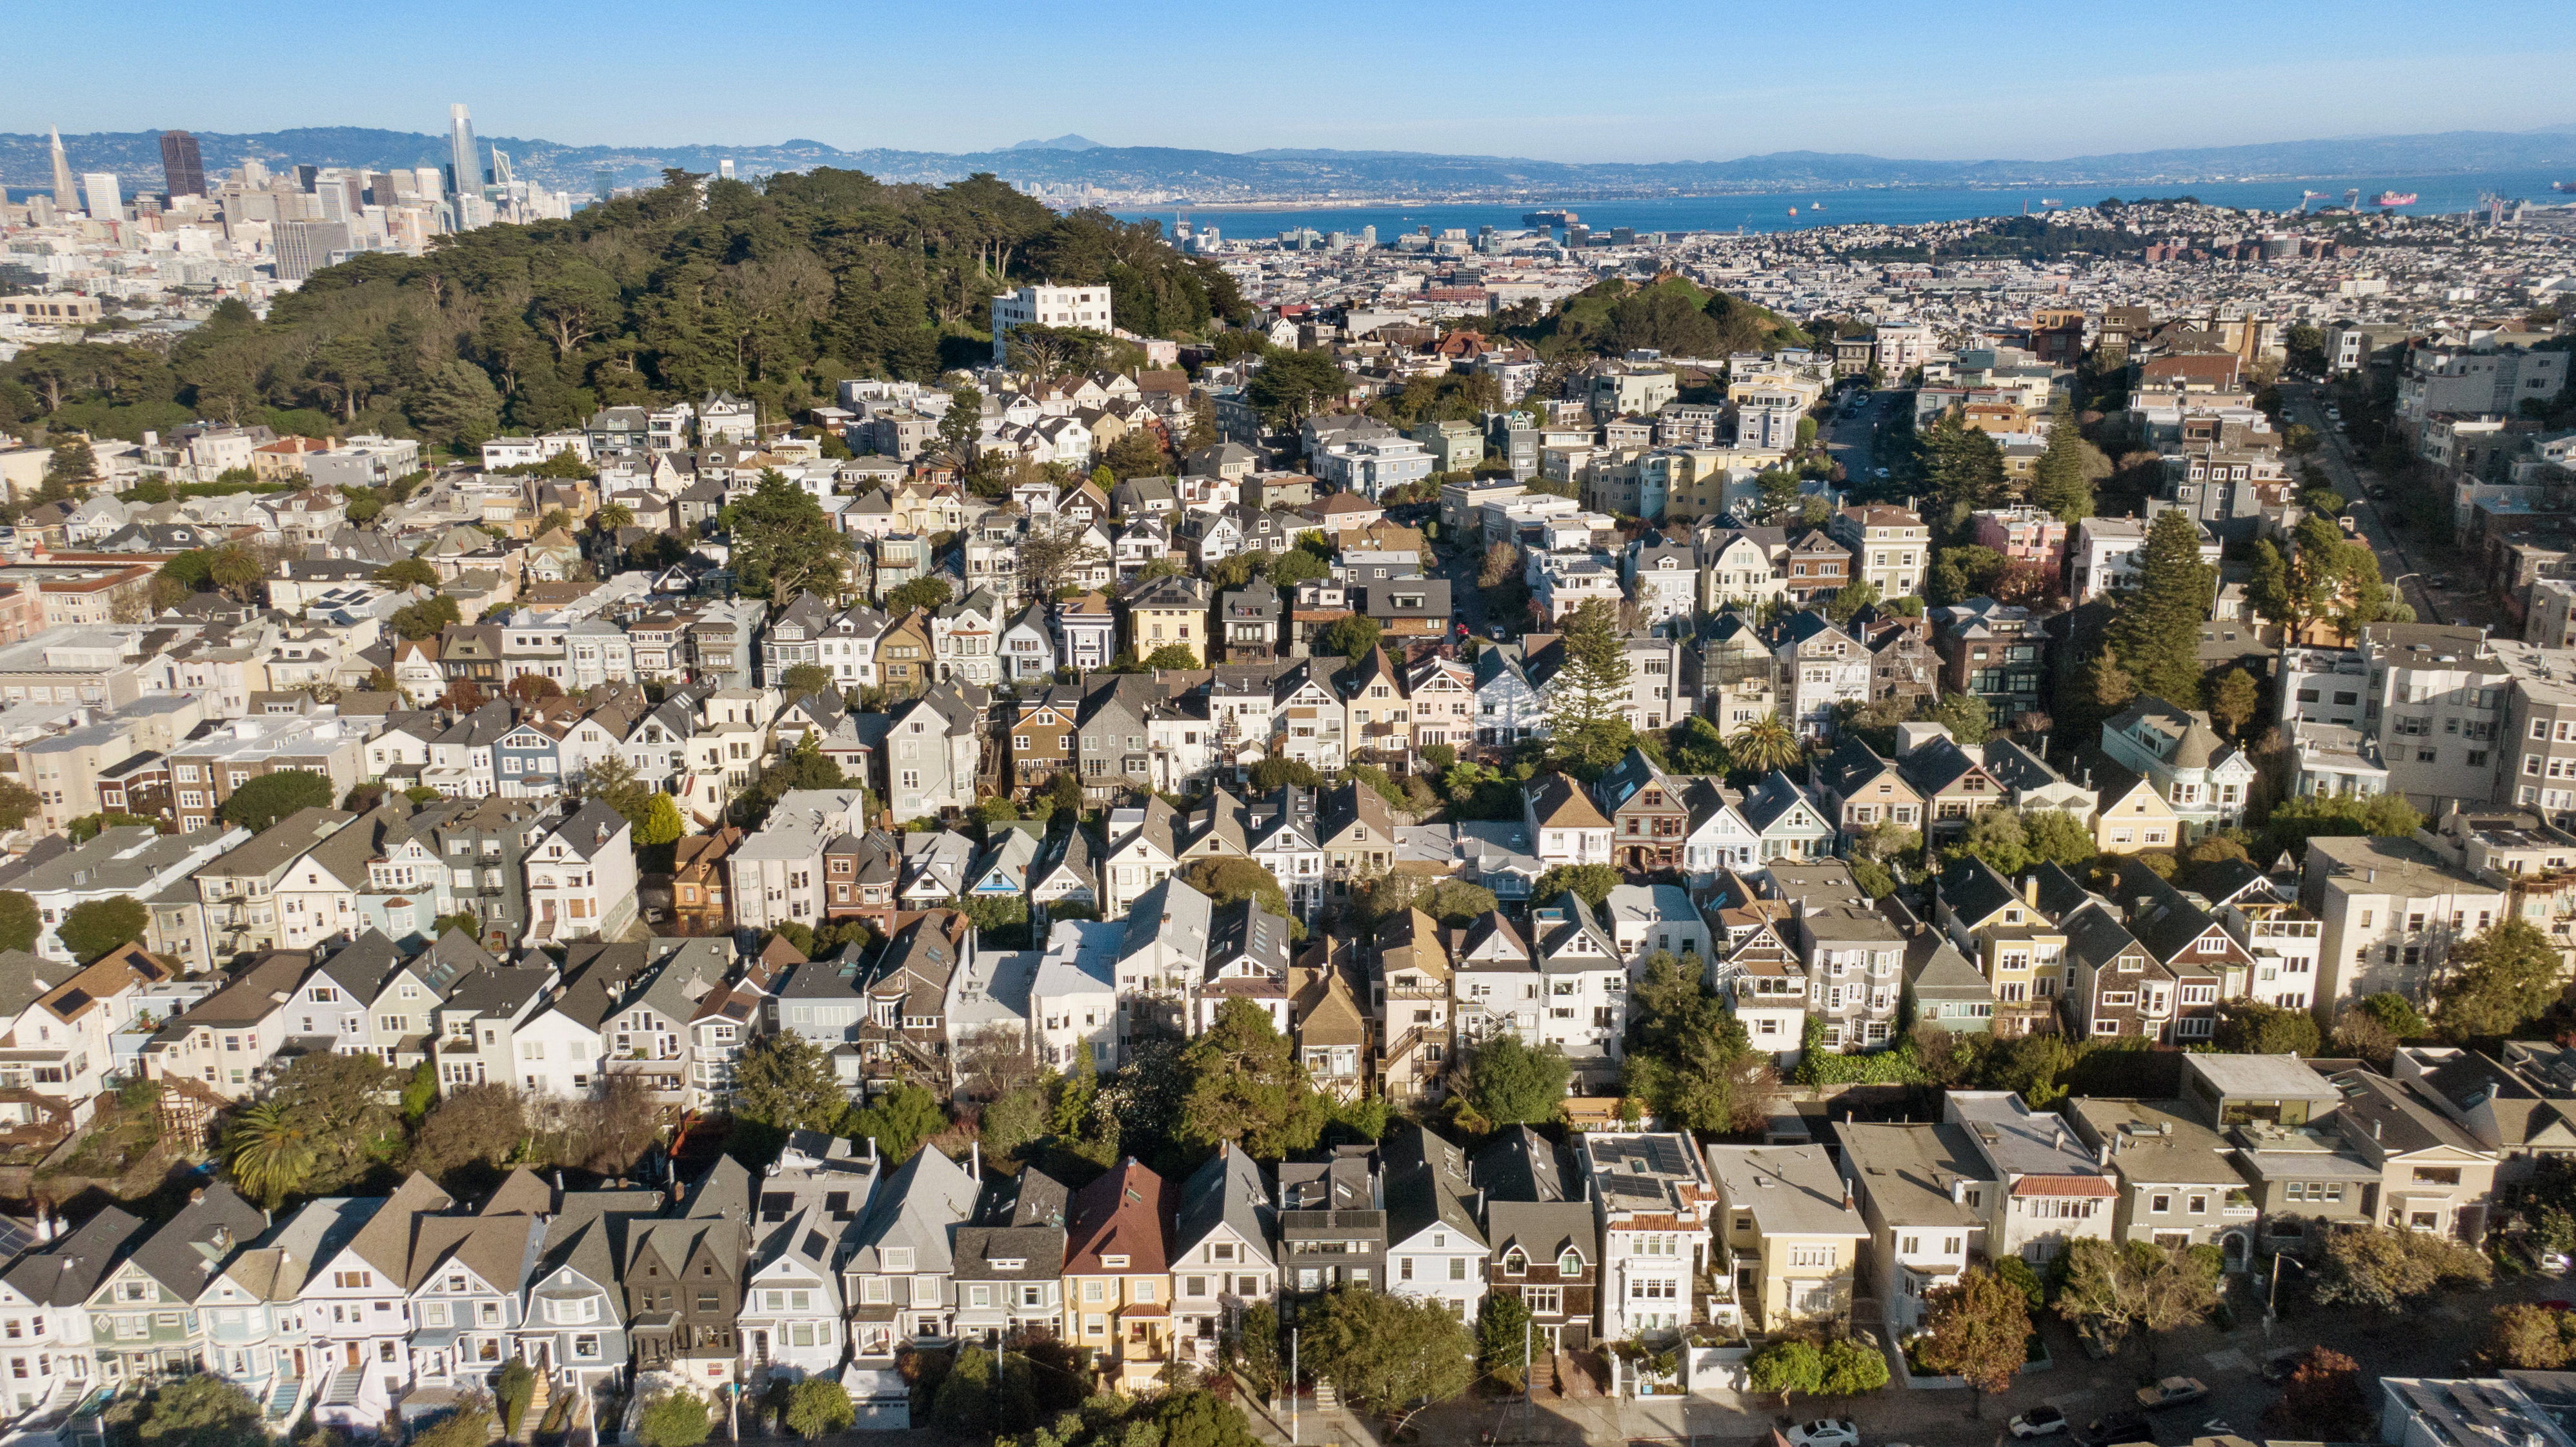 Property Photo: Aerial view of from 856 Clayton, showing downtown San Francisco, Buena Vista Park and the San Francisco Bay